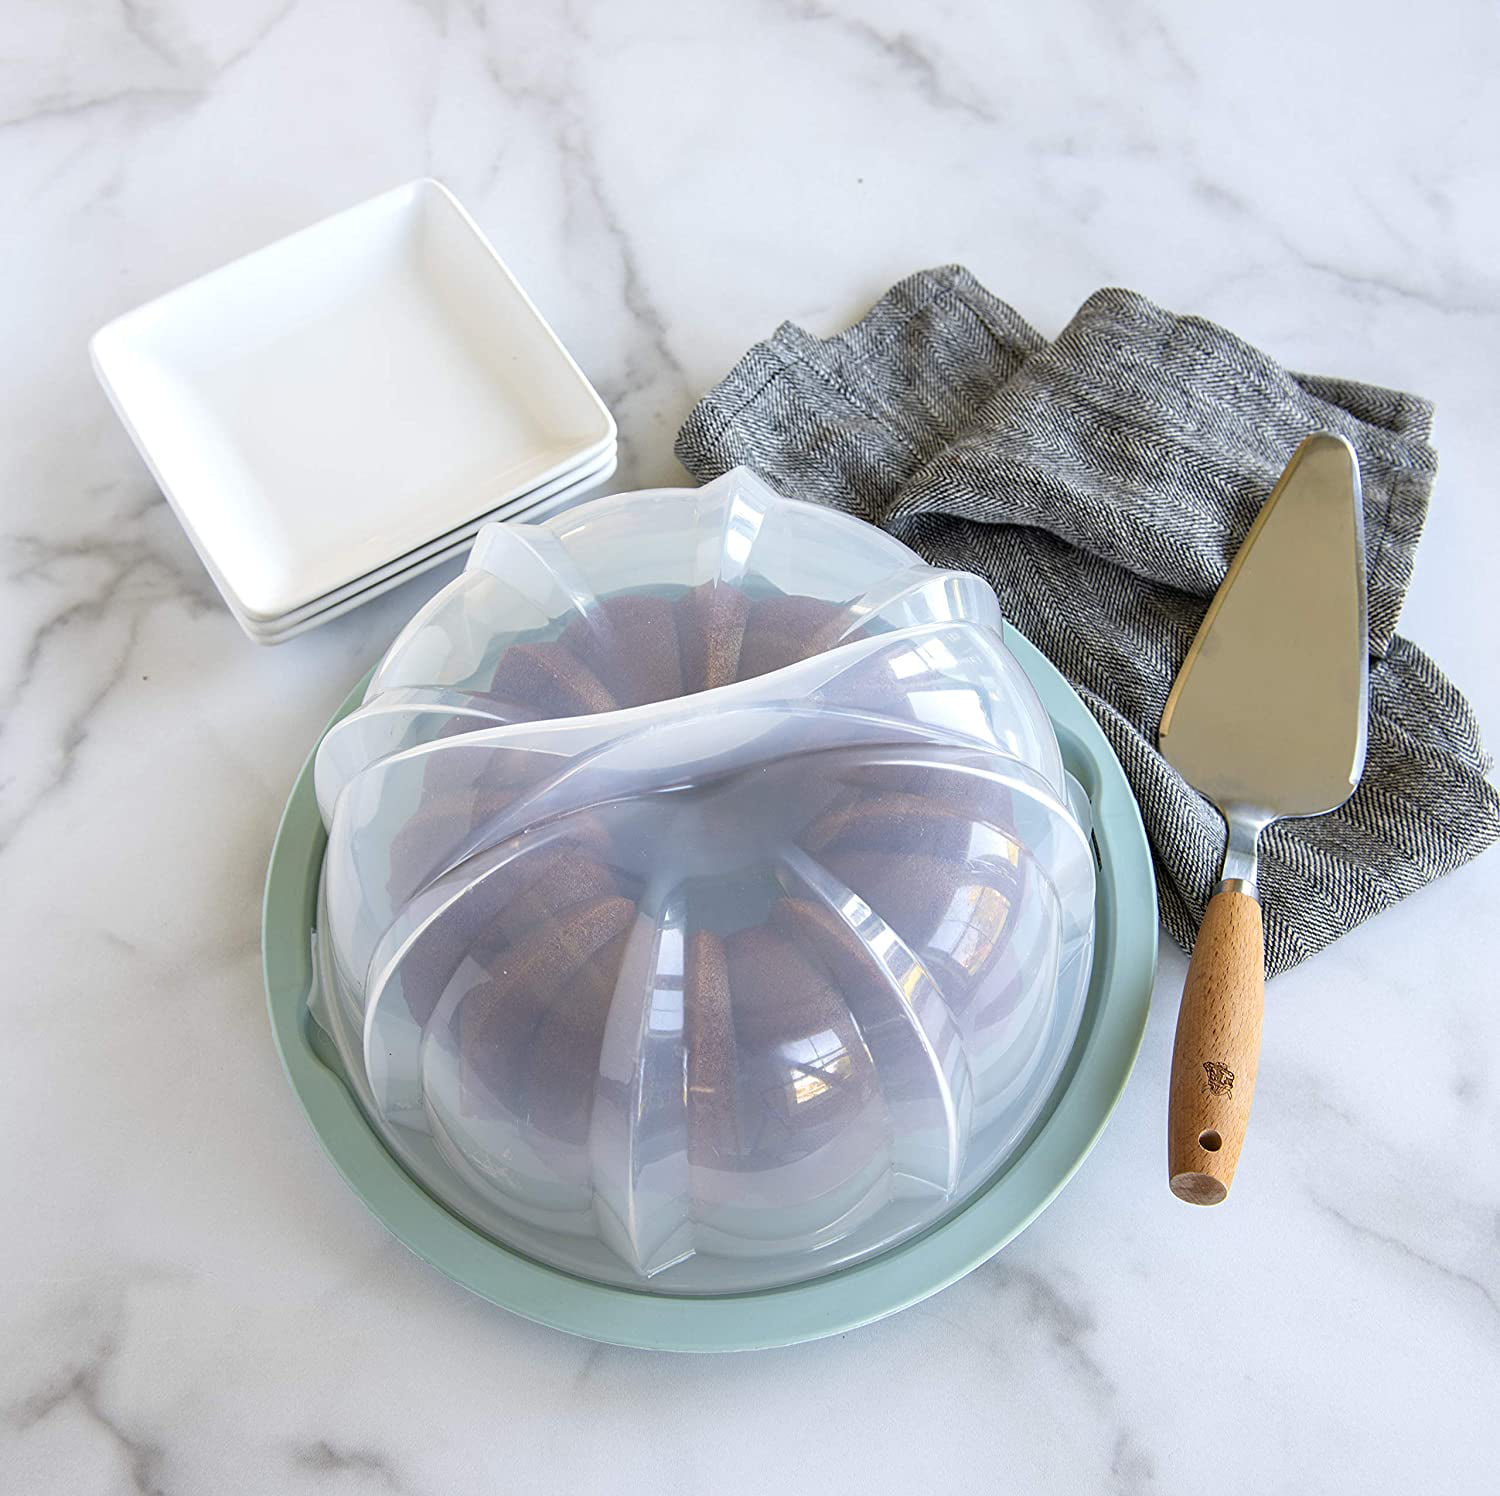 Nordic Ware Food Storage Containers - Translucent Bundt Cake